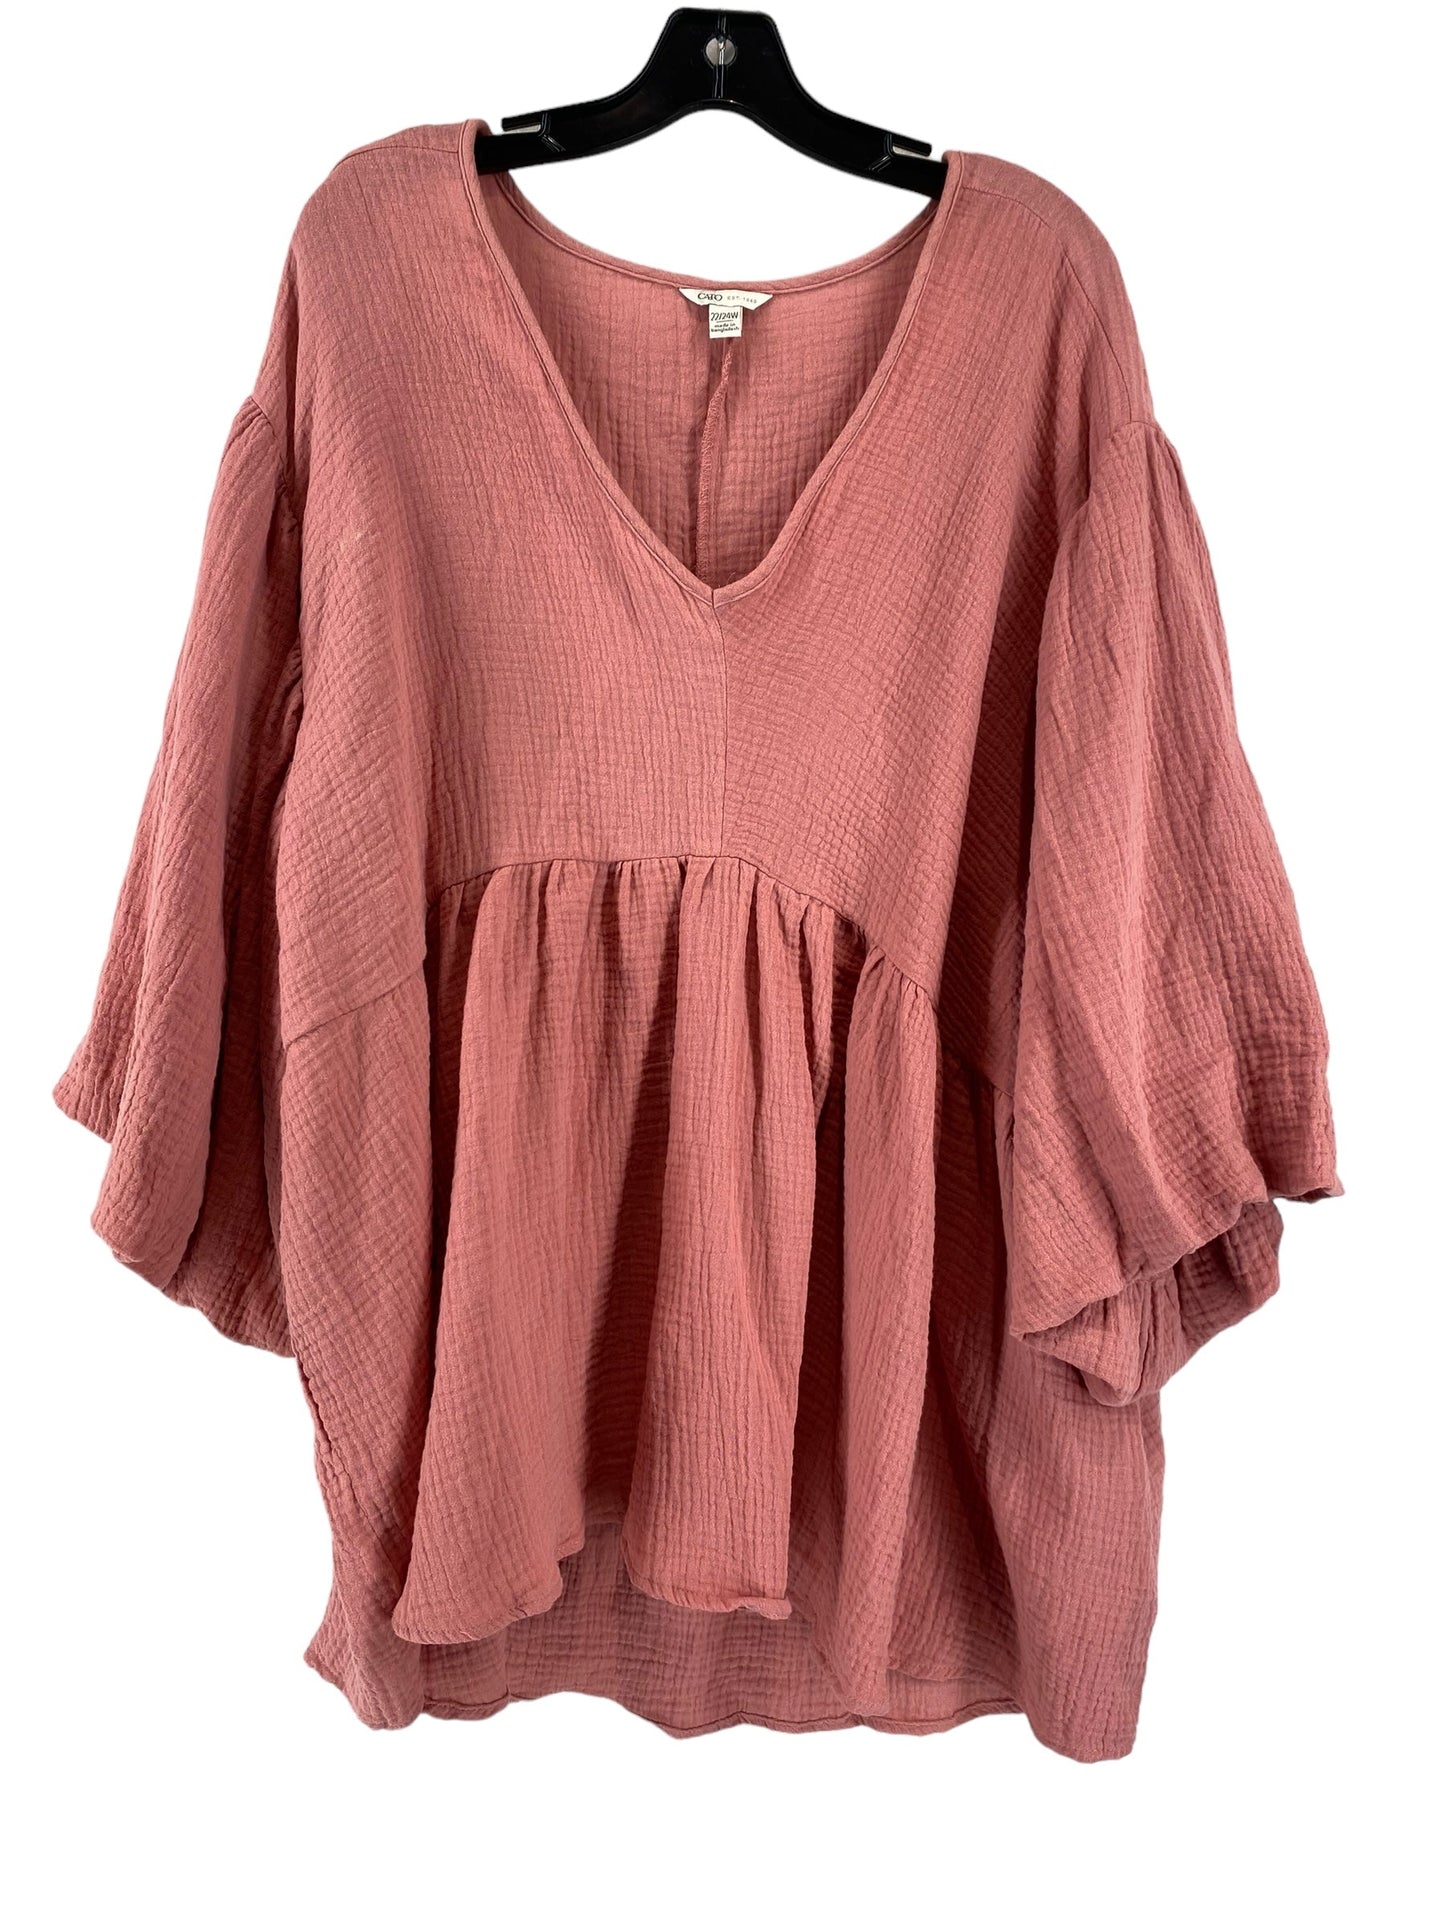 Pink Top 3/4 Sleeve Cato, Size 22